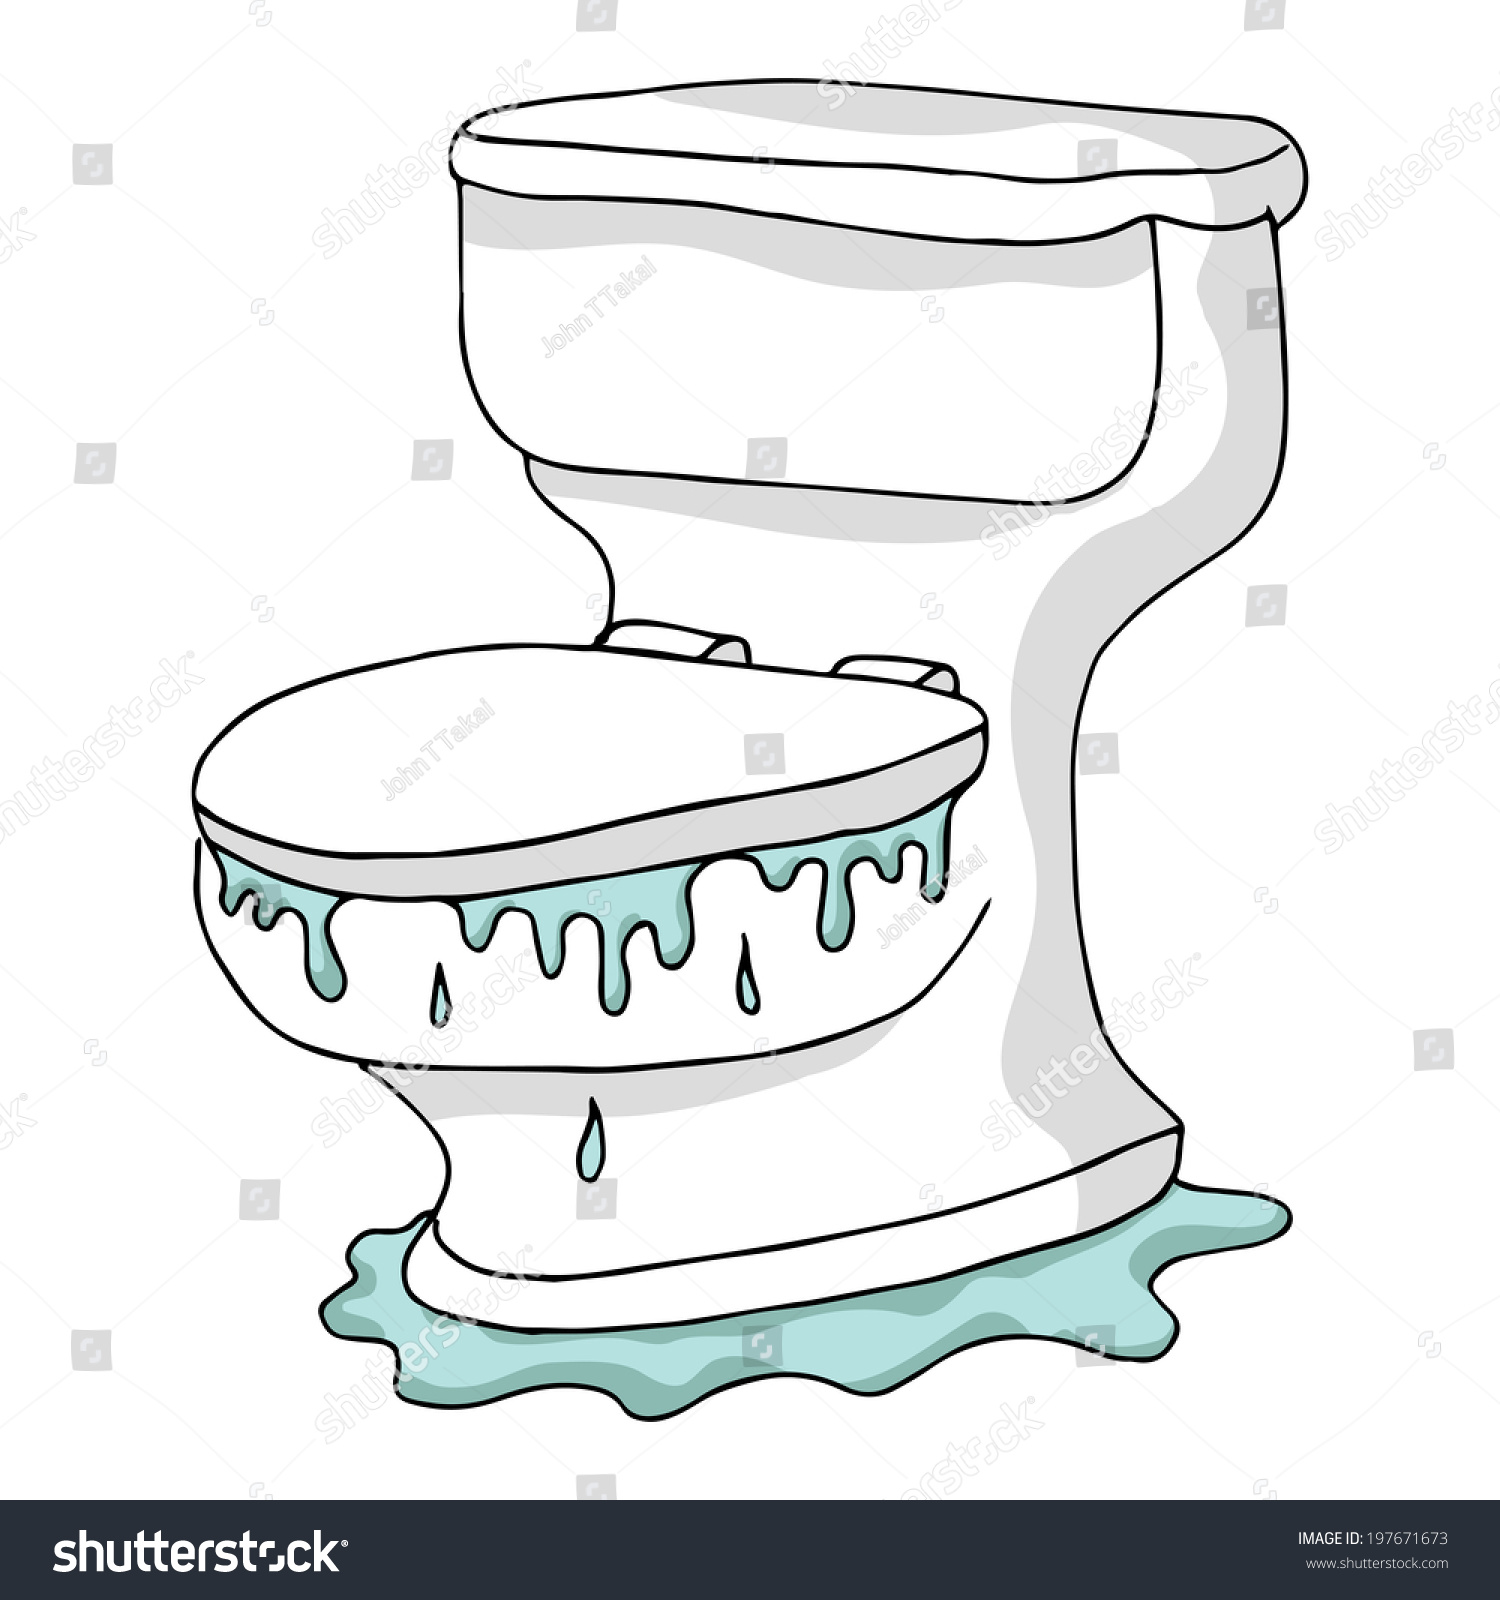 cup overflowing clipart - photo #32